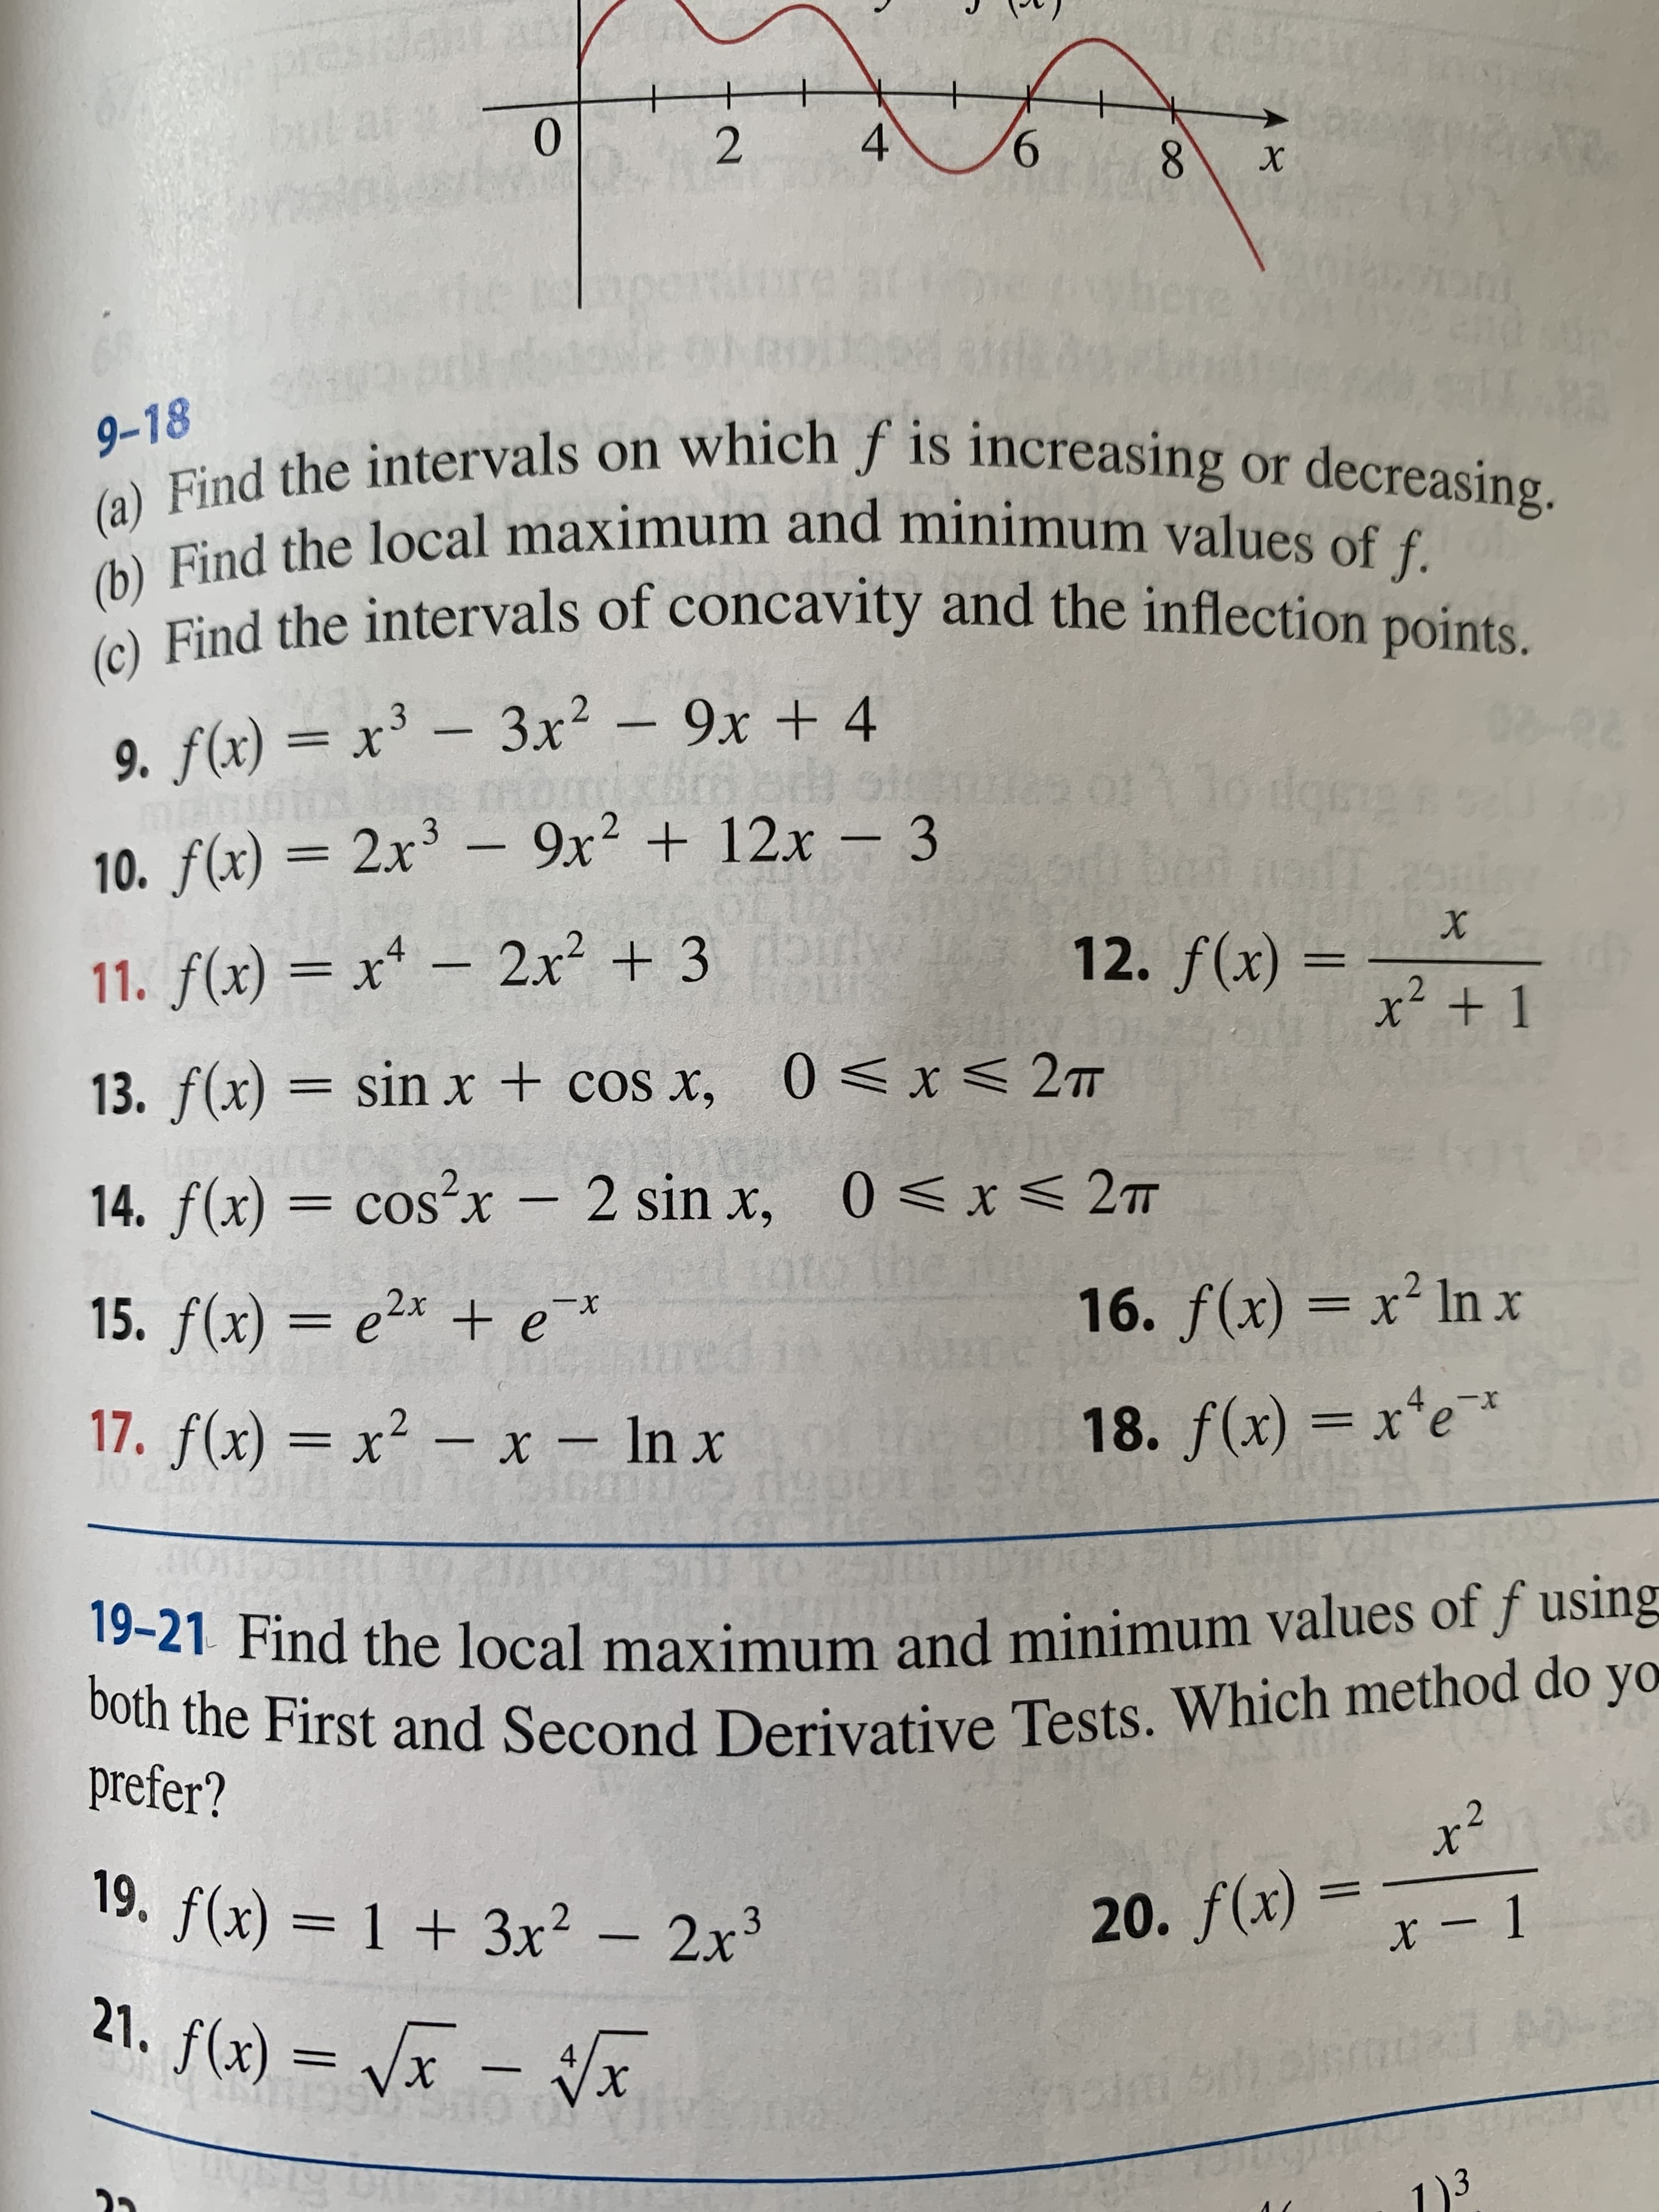 9-18
(a) Find the intervals on which f is increasing or decreasing.
(b) Find the local maximum and minimum values of f.
(c) Find the intervals of concavity and the inflection points.
9. f(x) = x³ – 3x² – 9x + 4
-
10. f(x) = 2x³ – 9x² + 12x – 3
%3D
